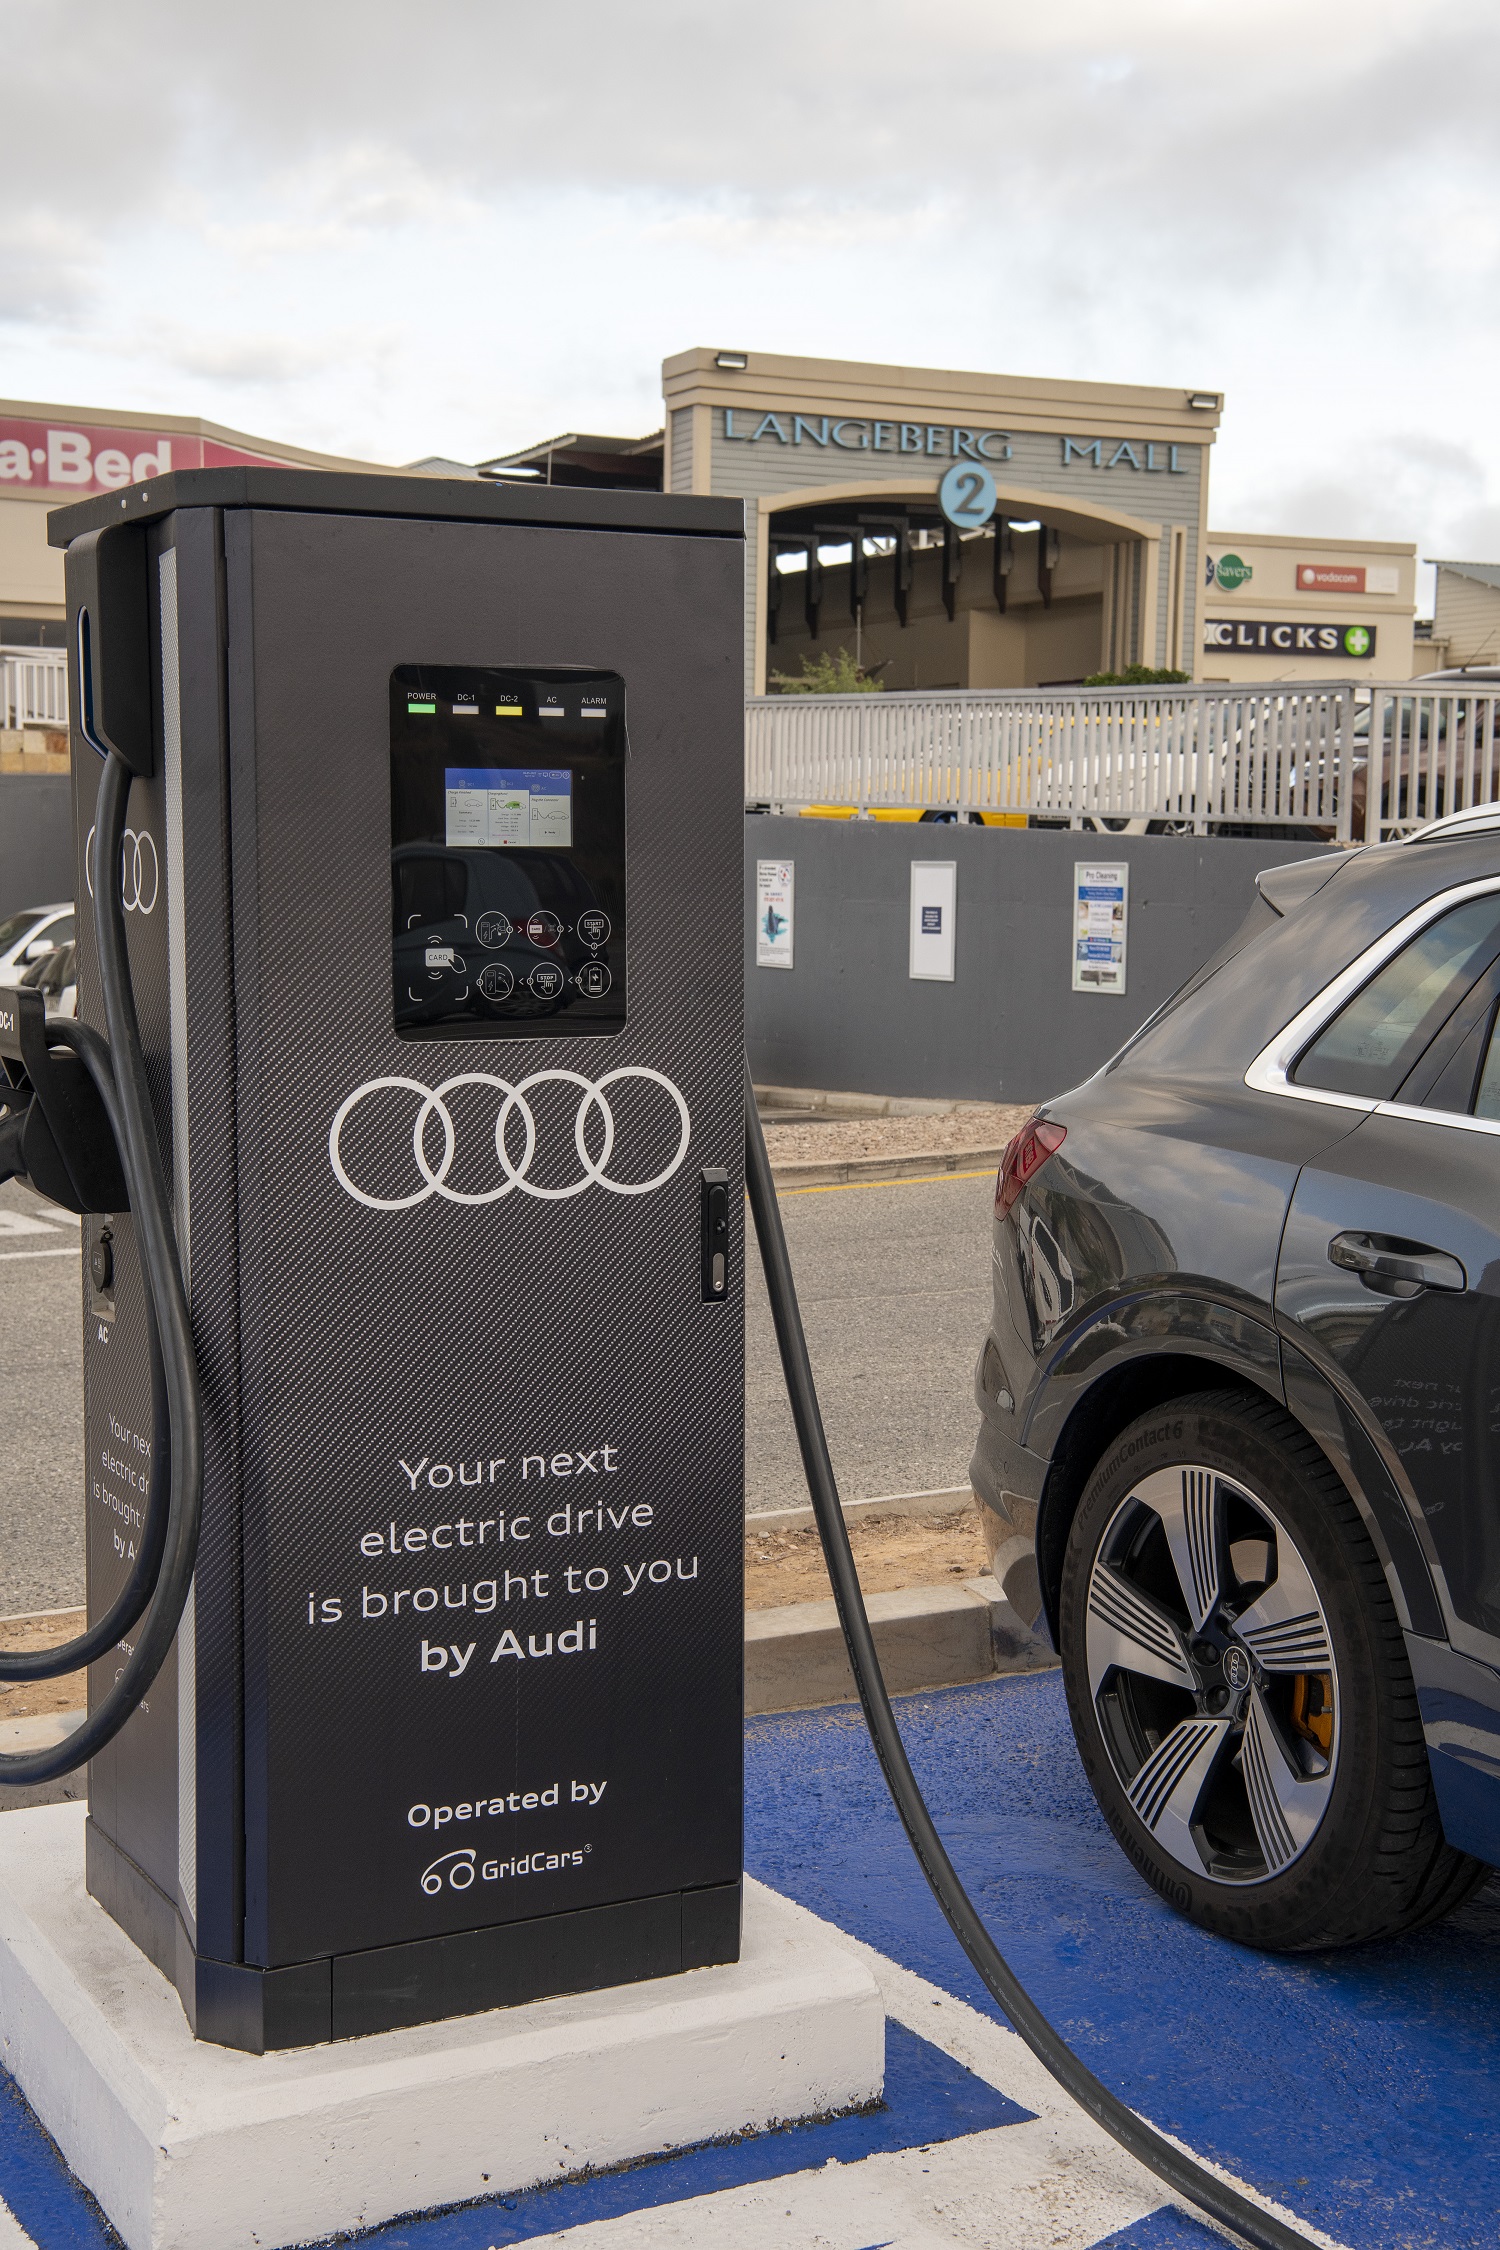 Audi and GridCars introduce more charging stations